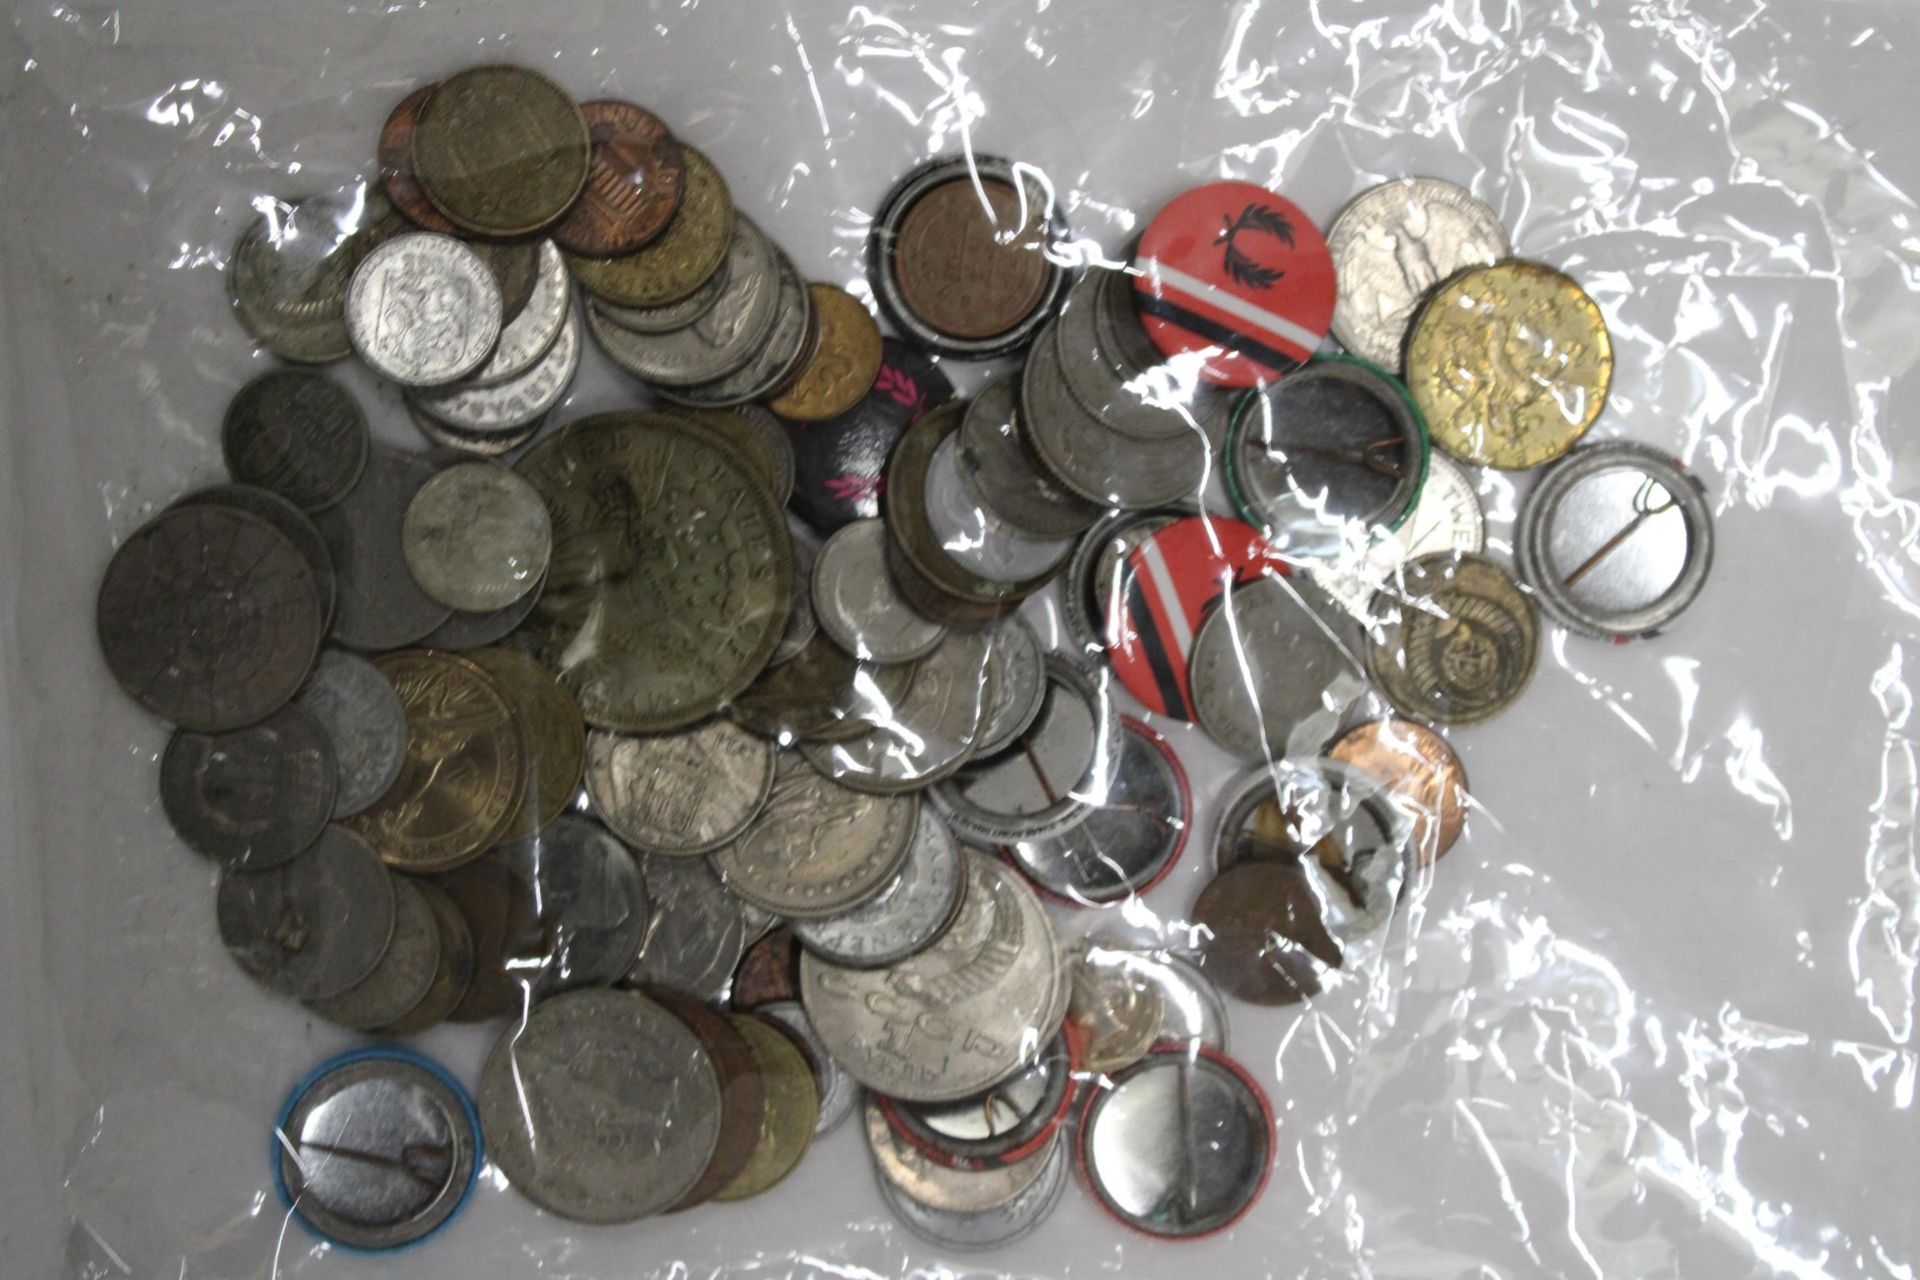 A COLLECTION OF VINTAGE FOREIGN COINS AND BADGES